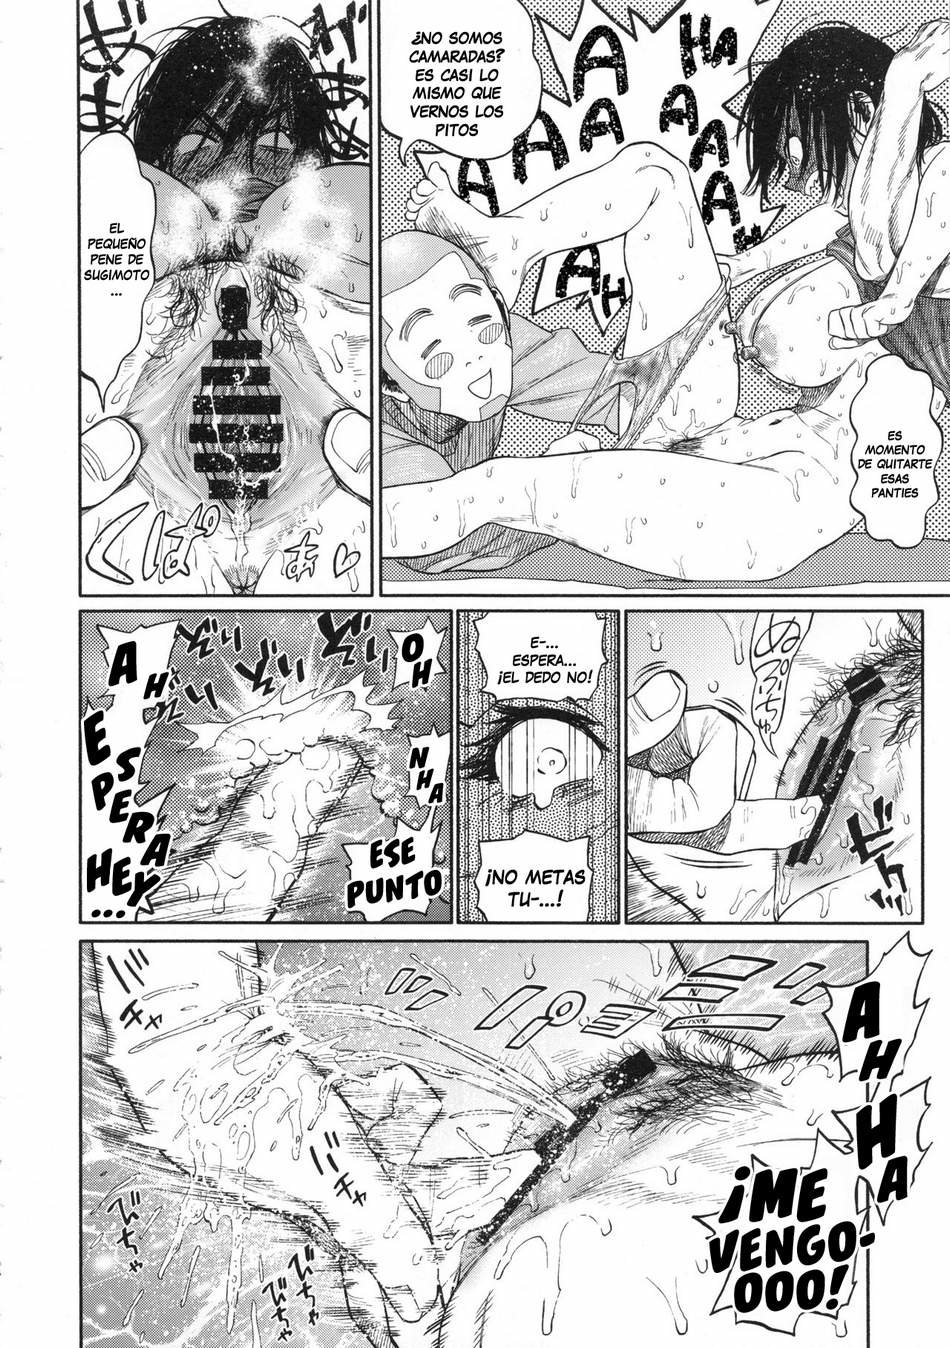 Lets Have Some Sea Otter Meat With Sugimoto-san (Golden Kamuy) - Nishida - 14